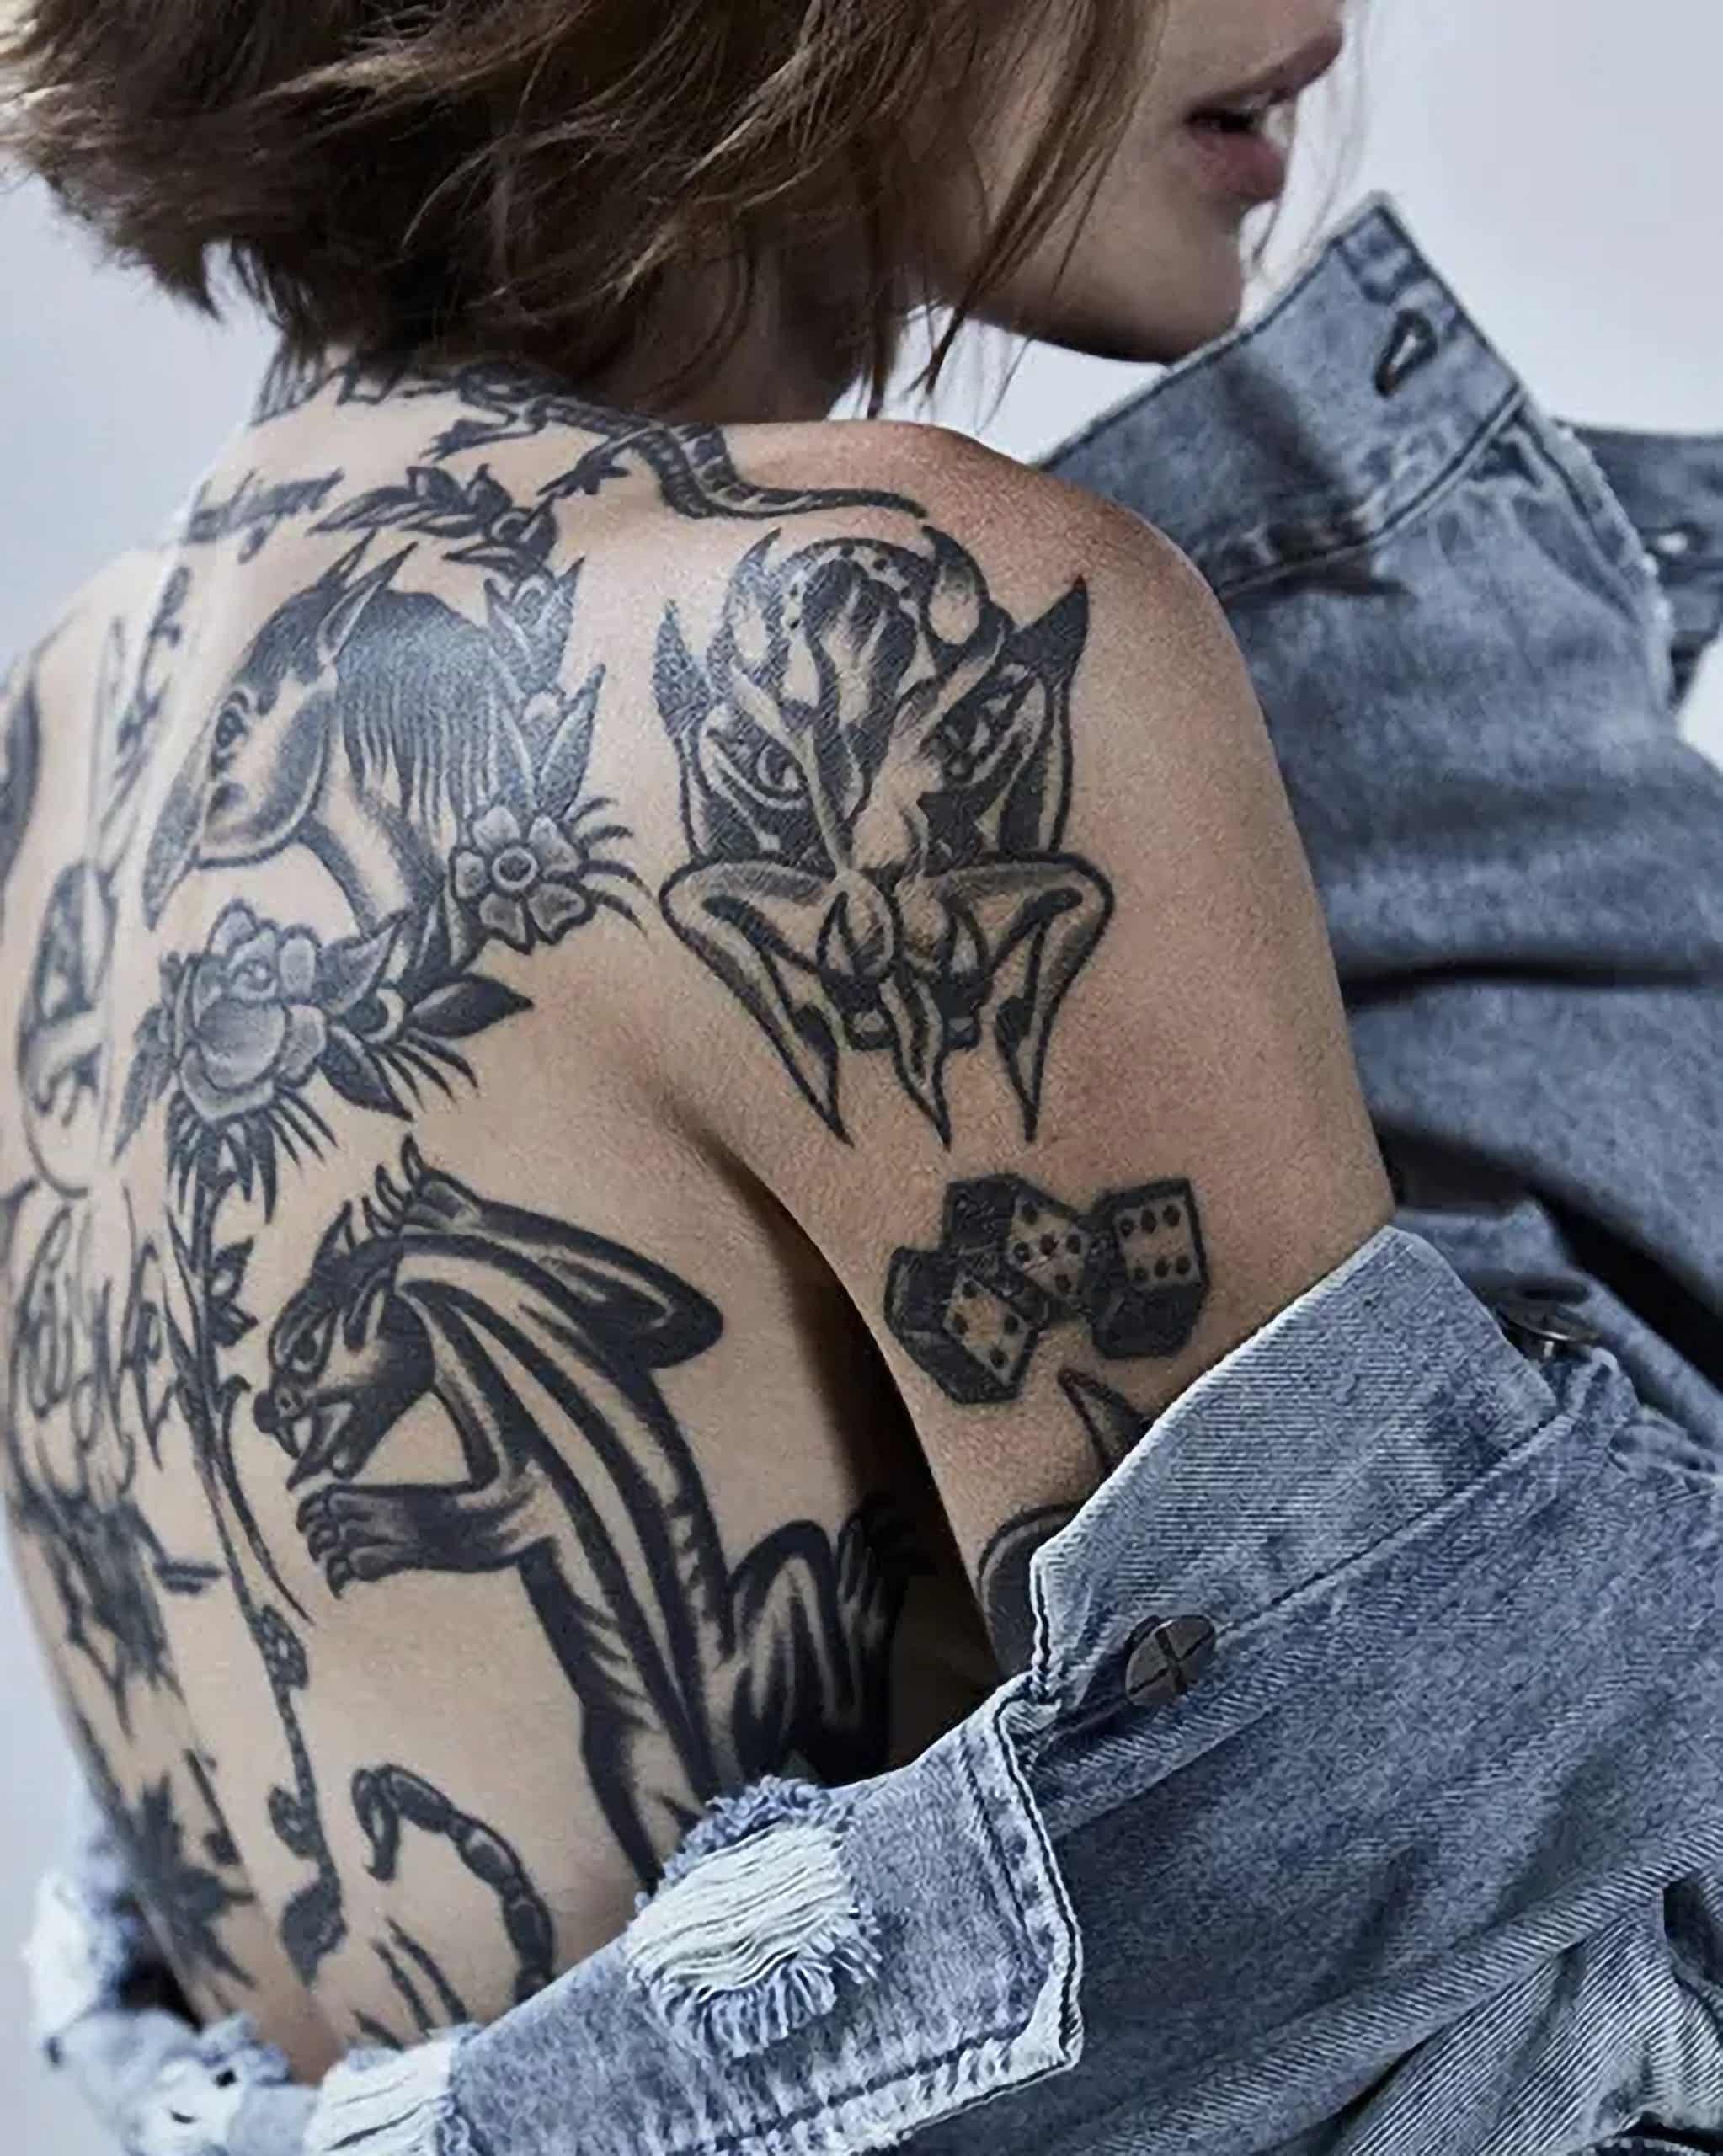 A photograph of a female model with brown shoulder-length hair, wearing a light blue Ksubi denim jacket which is falling off her shoulders. The model's shoulders and upper back is visible and are covered in classic-style tattoos.